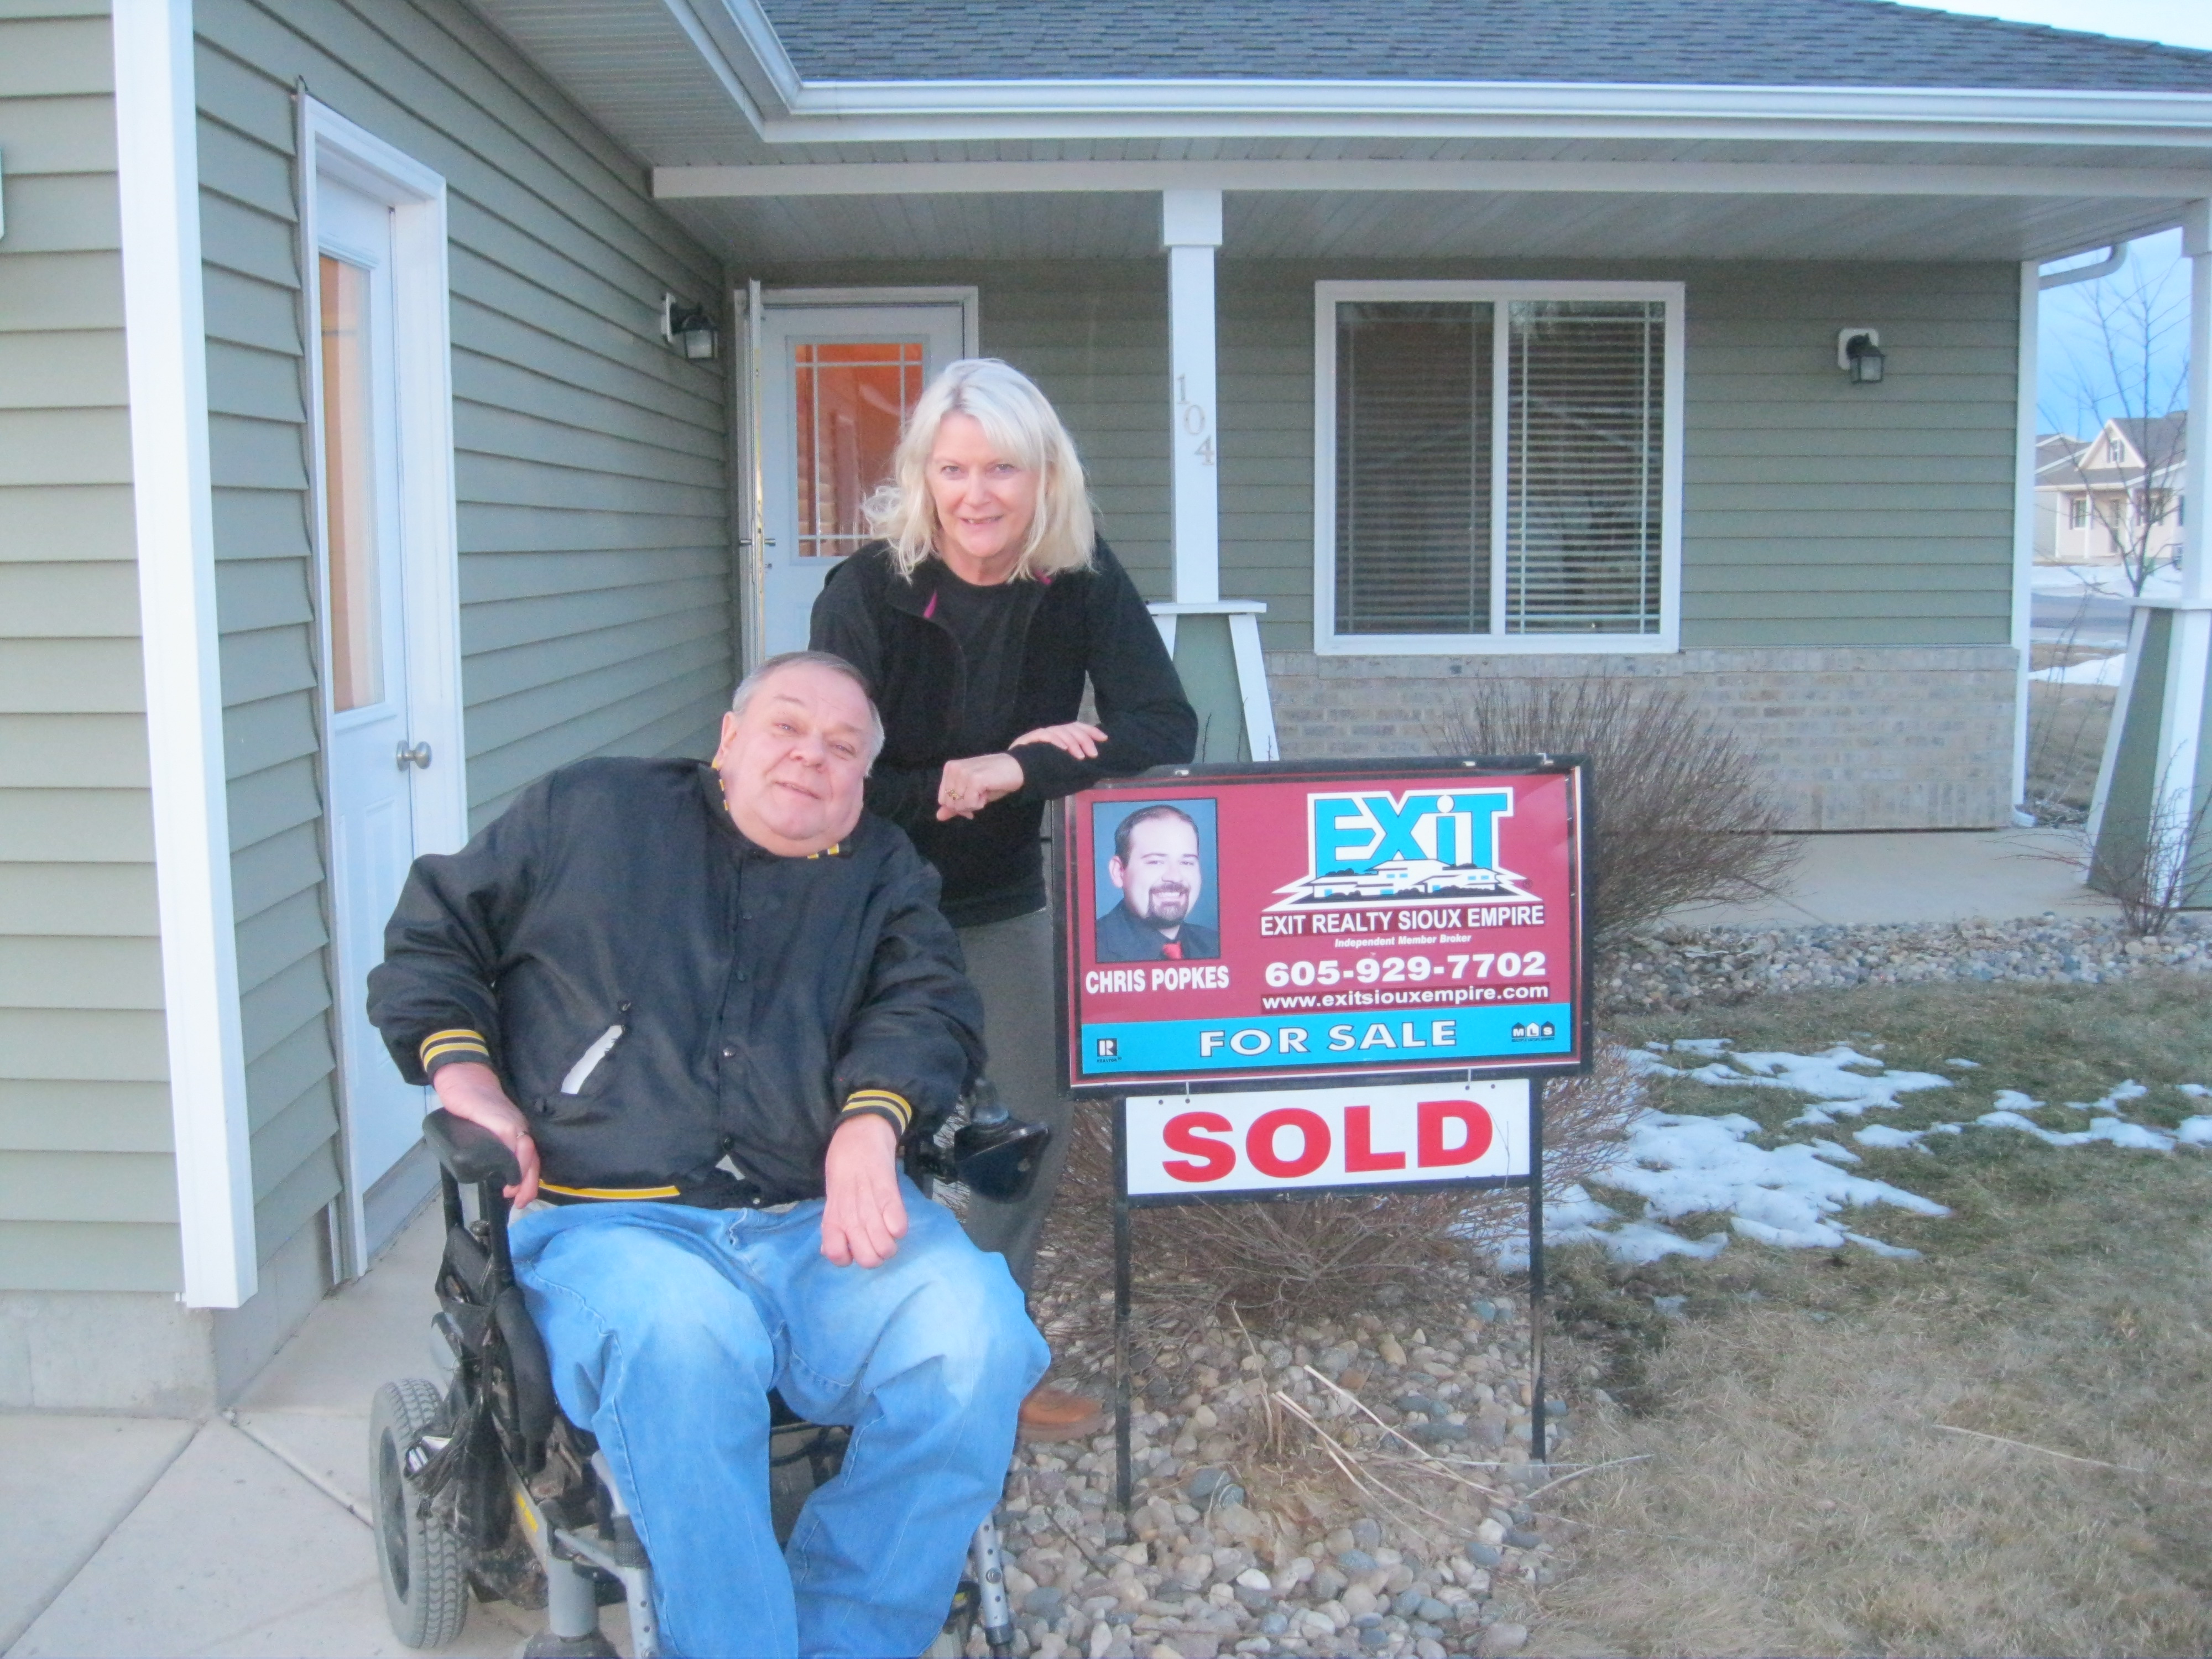 SOLD! Always a great time working with family!